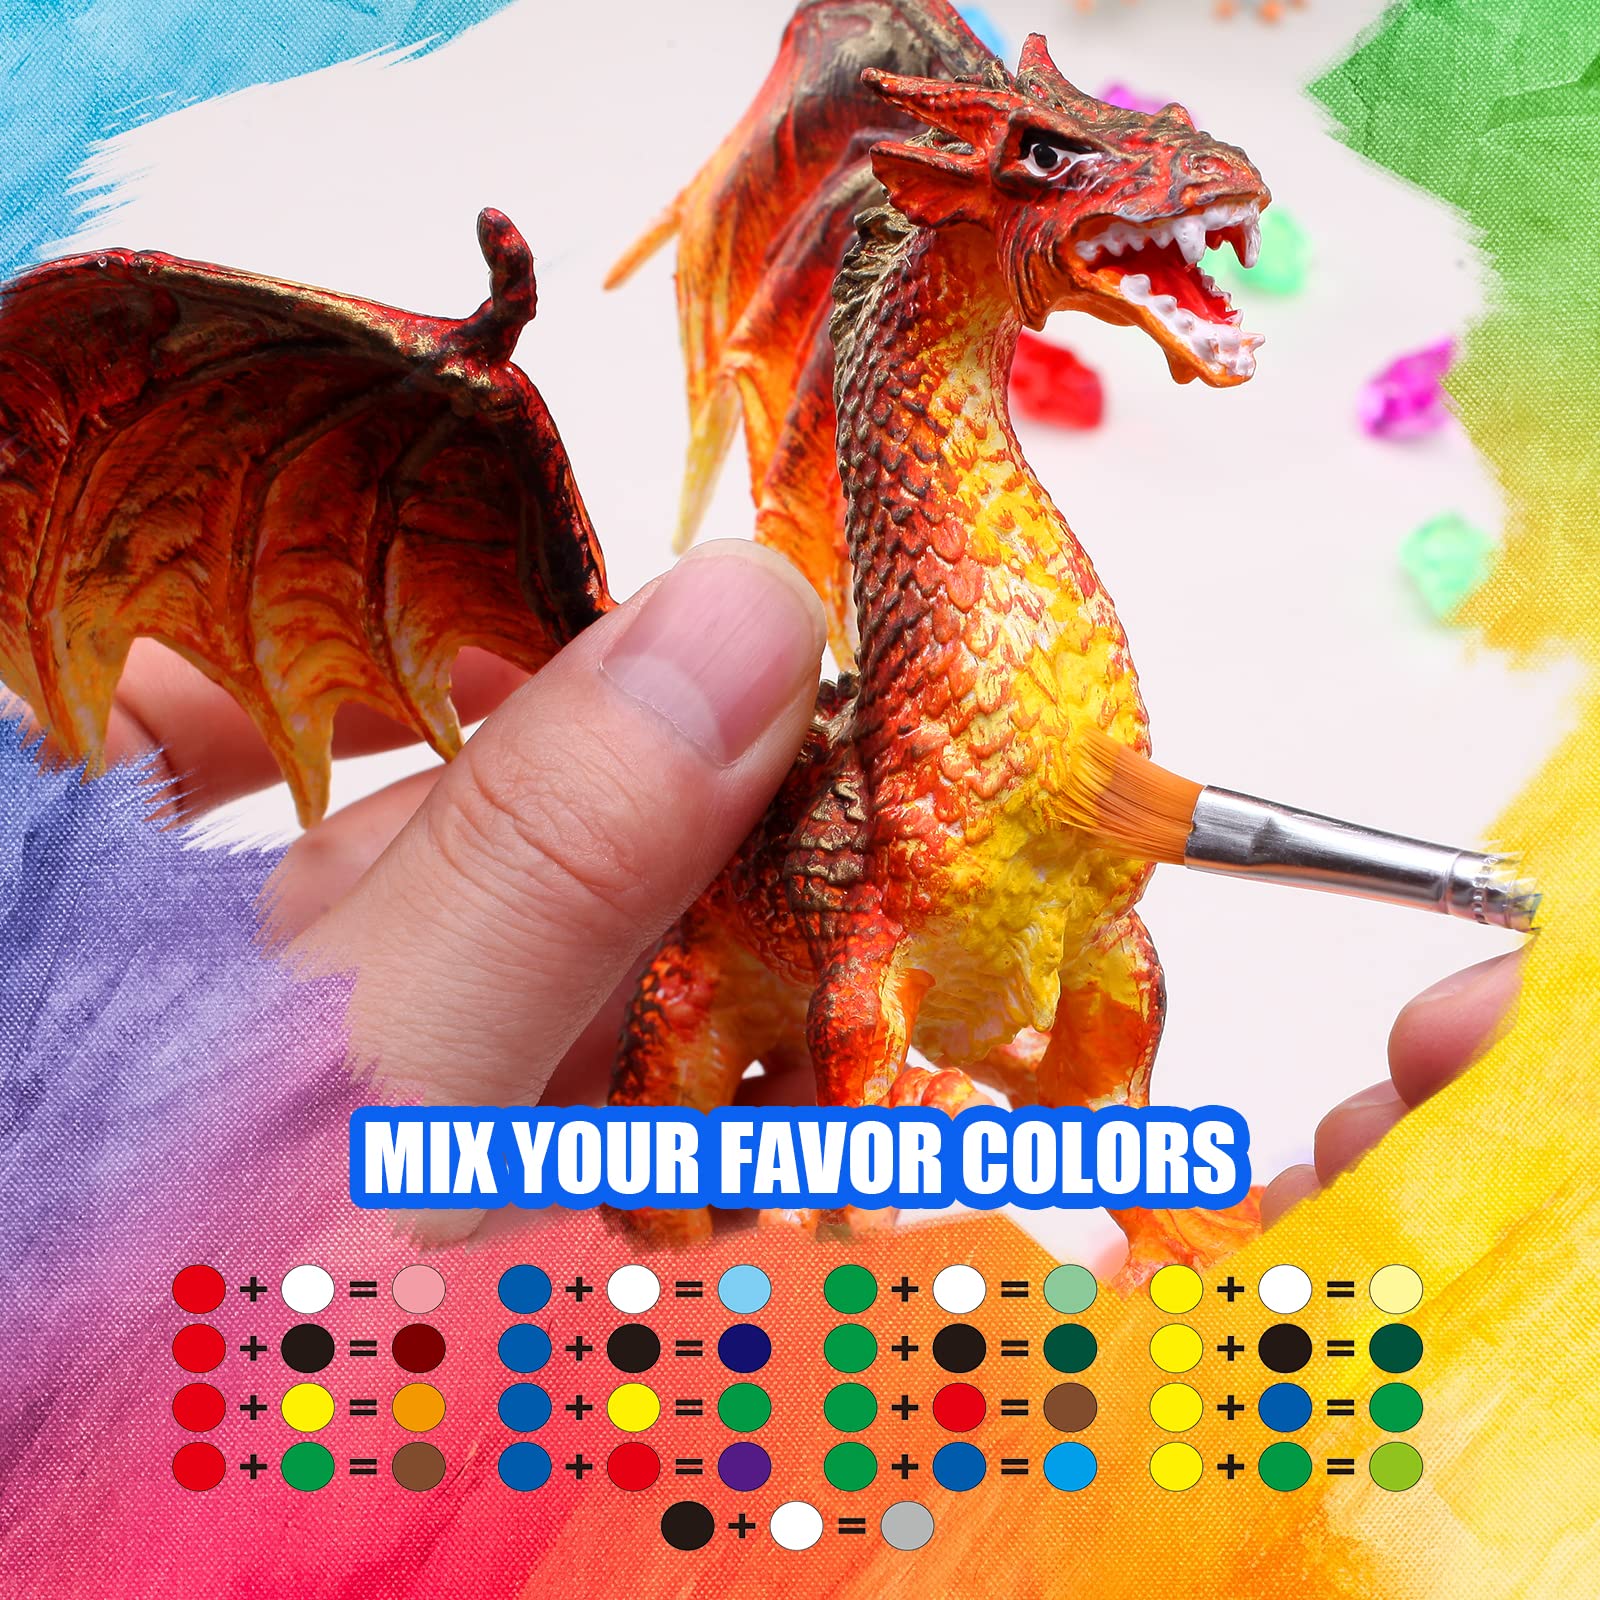 SOLDAY Painting Dragon Toys Kits for Kids Arts and Crafts Ages 3 6 5 7 9 12 Boys Girls to Make Your Own Paintable Figurines Birthday Party Supplies - 2 Dragons